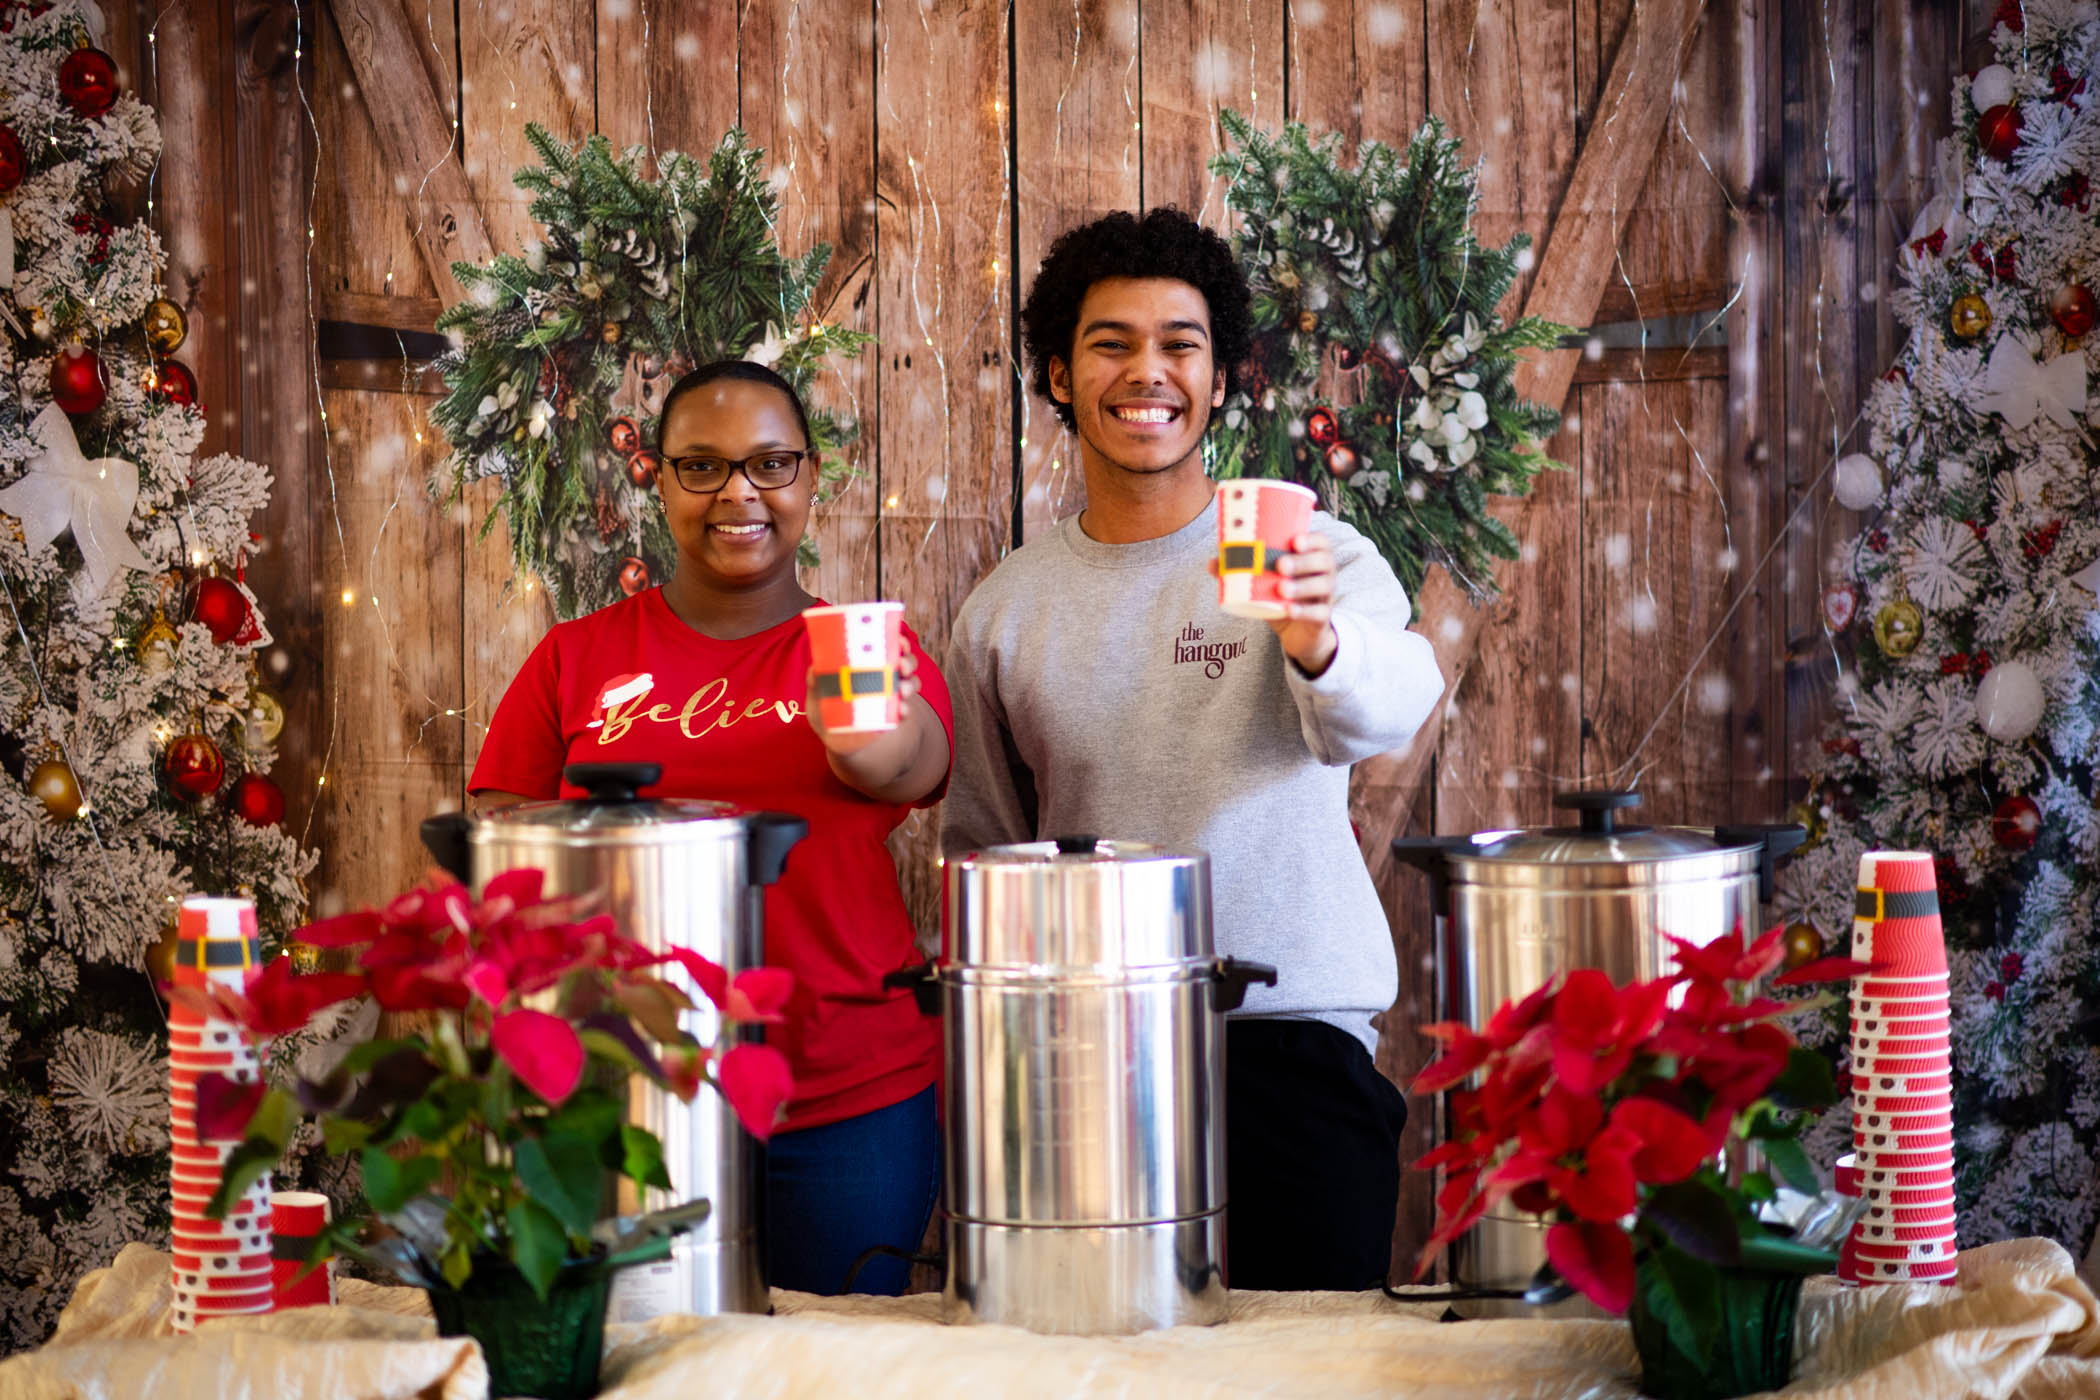 The Graduate School staff Robbie Salters (Left) and Tyrone Tolbert Jr. (Right) service hot cocoa and apple cider to those excited for the holidays at the department&#039;s annual hot coca bar.